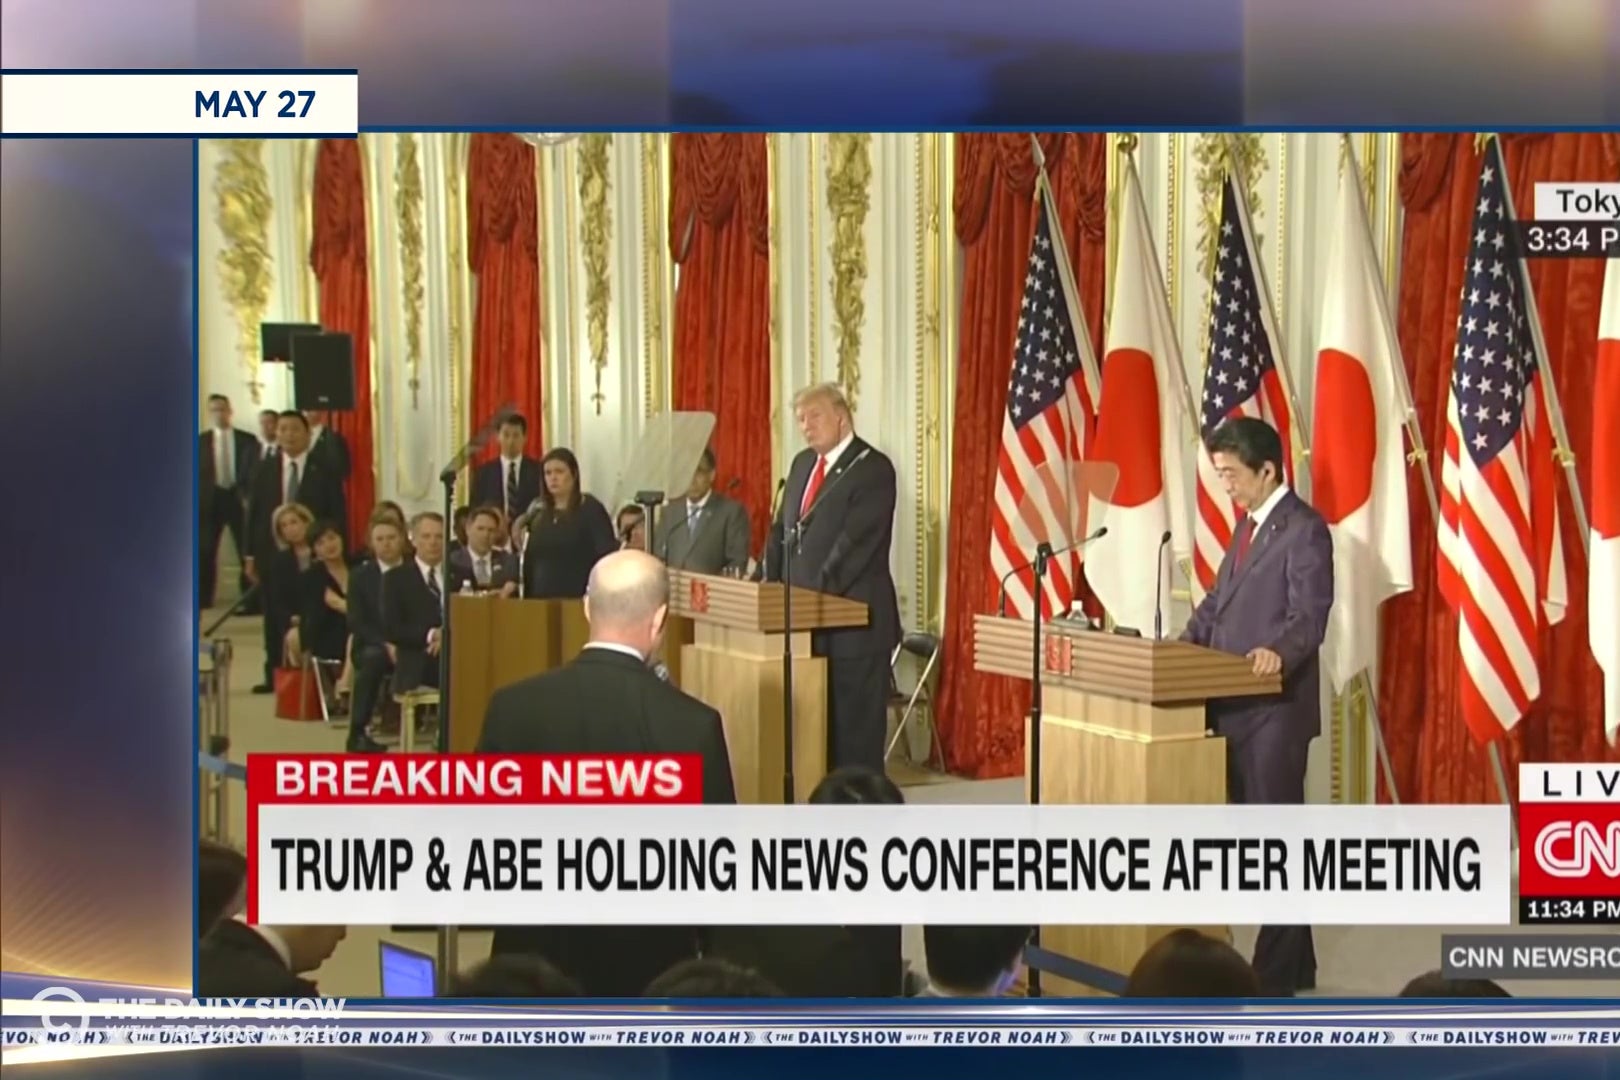 A frame from CNN's coverage of the news conference Shinzō Abe & Donald Trump held in Japan, as seen on The Daily Show.